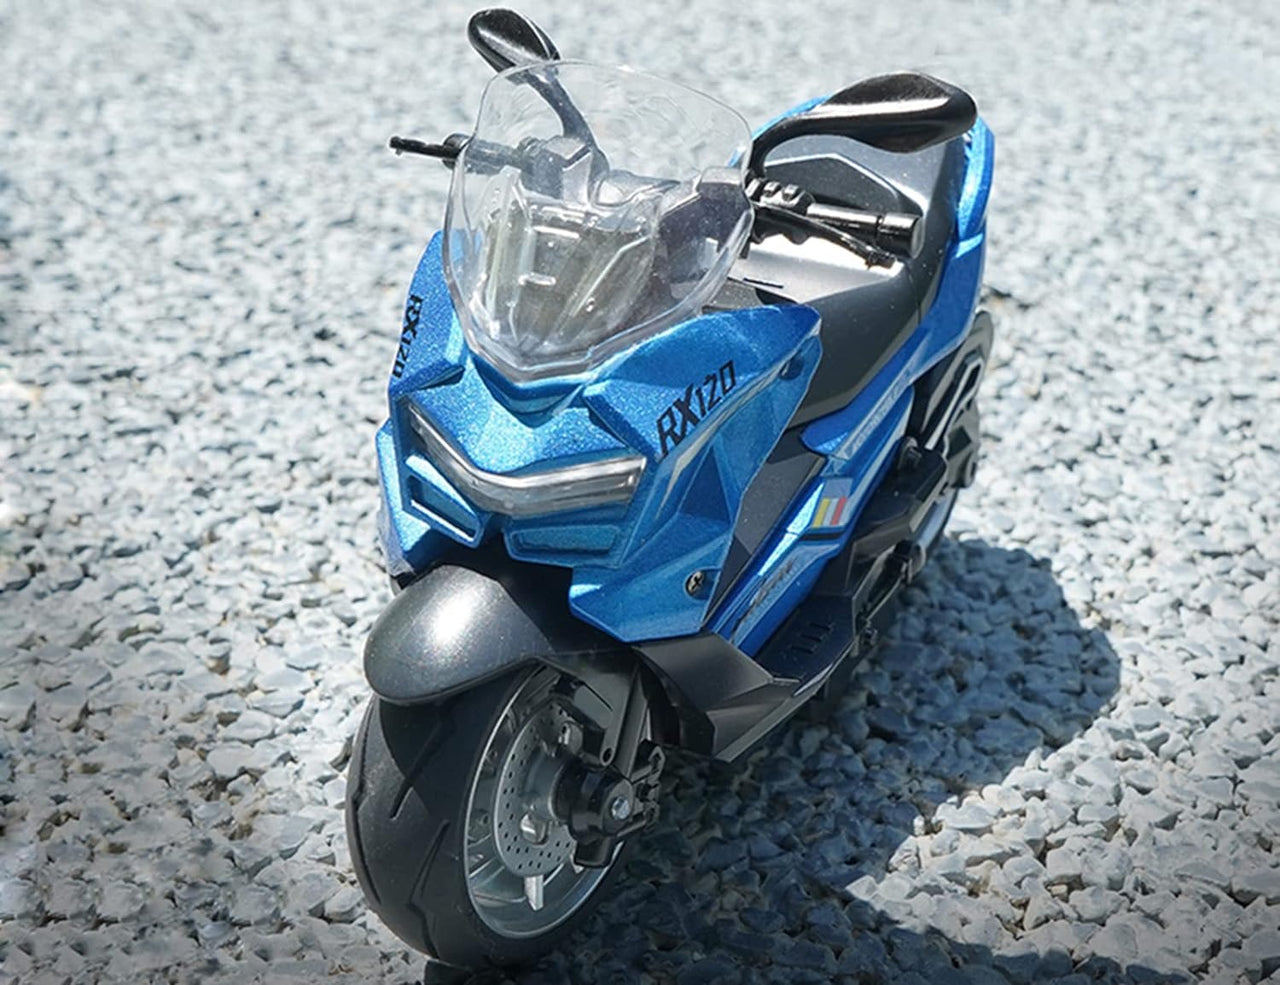 Moto Diecast Motorcycle With Light And Sound